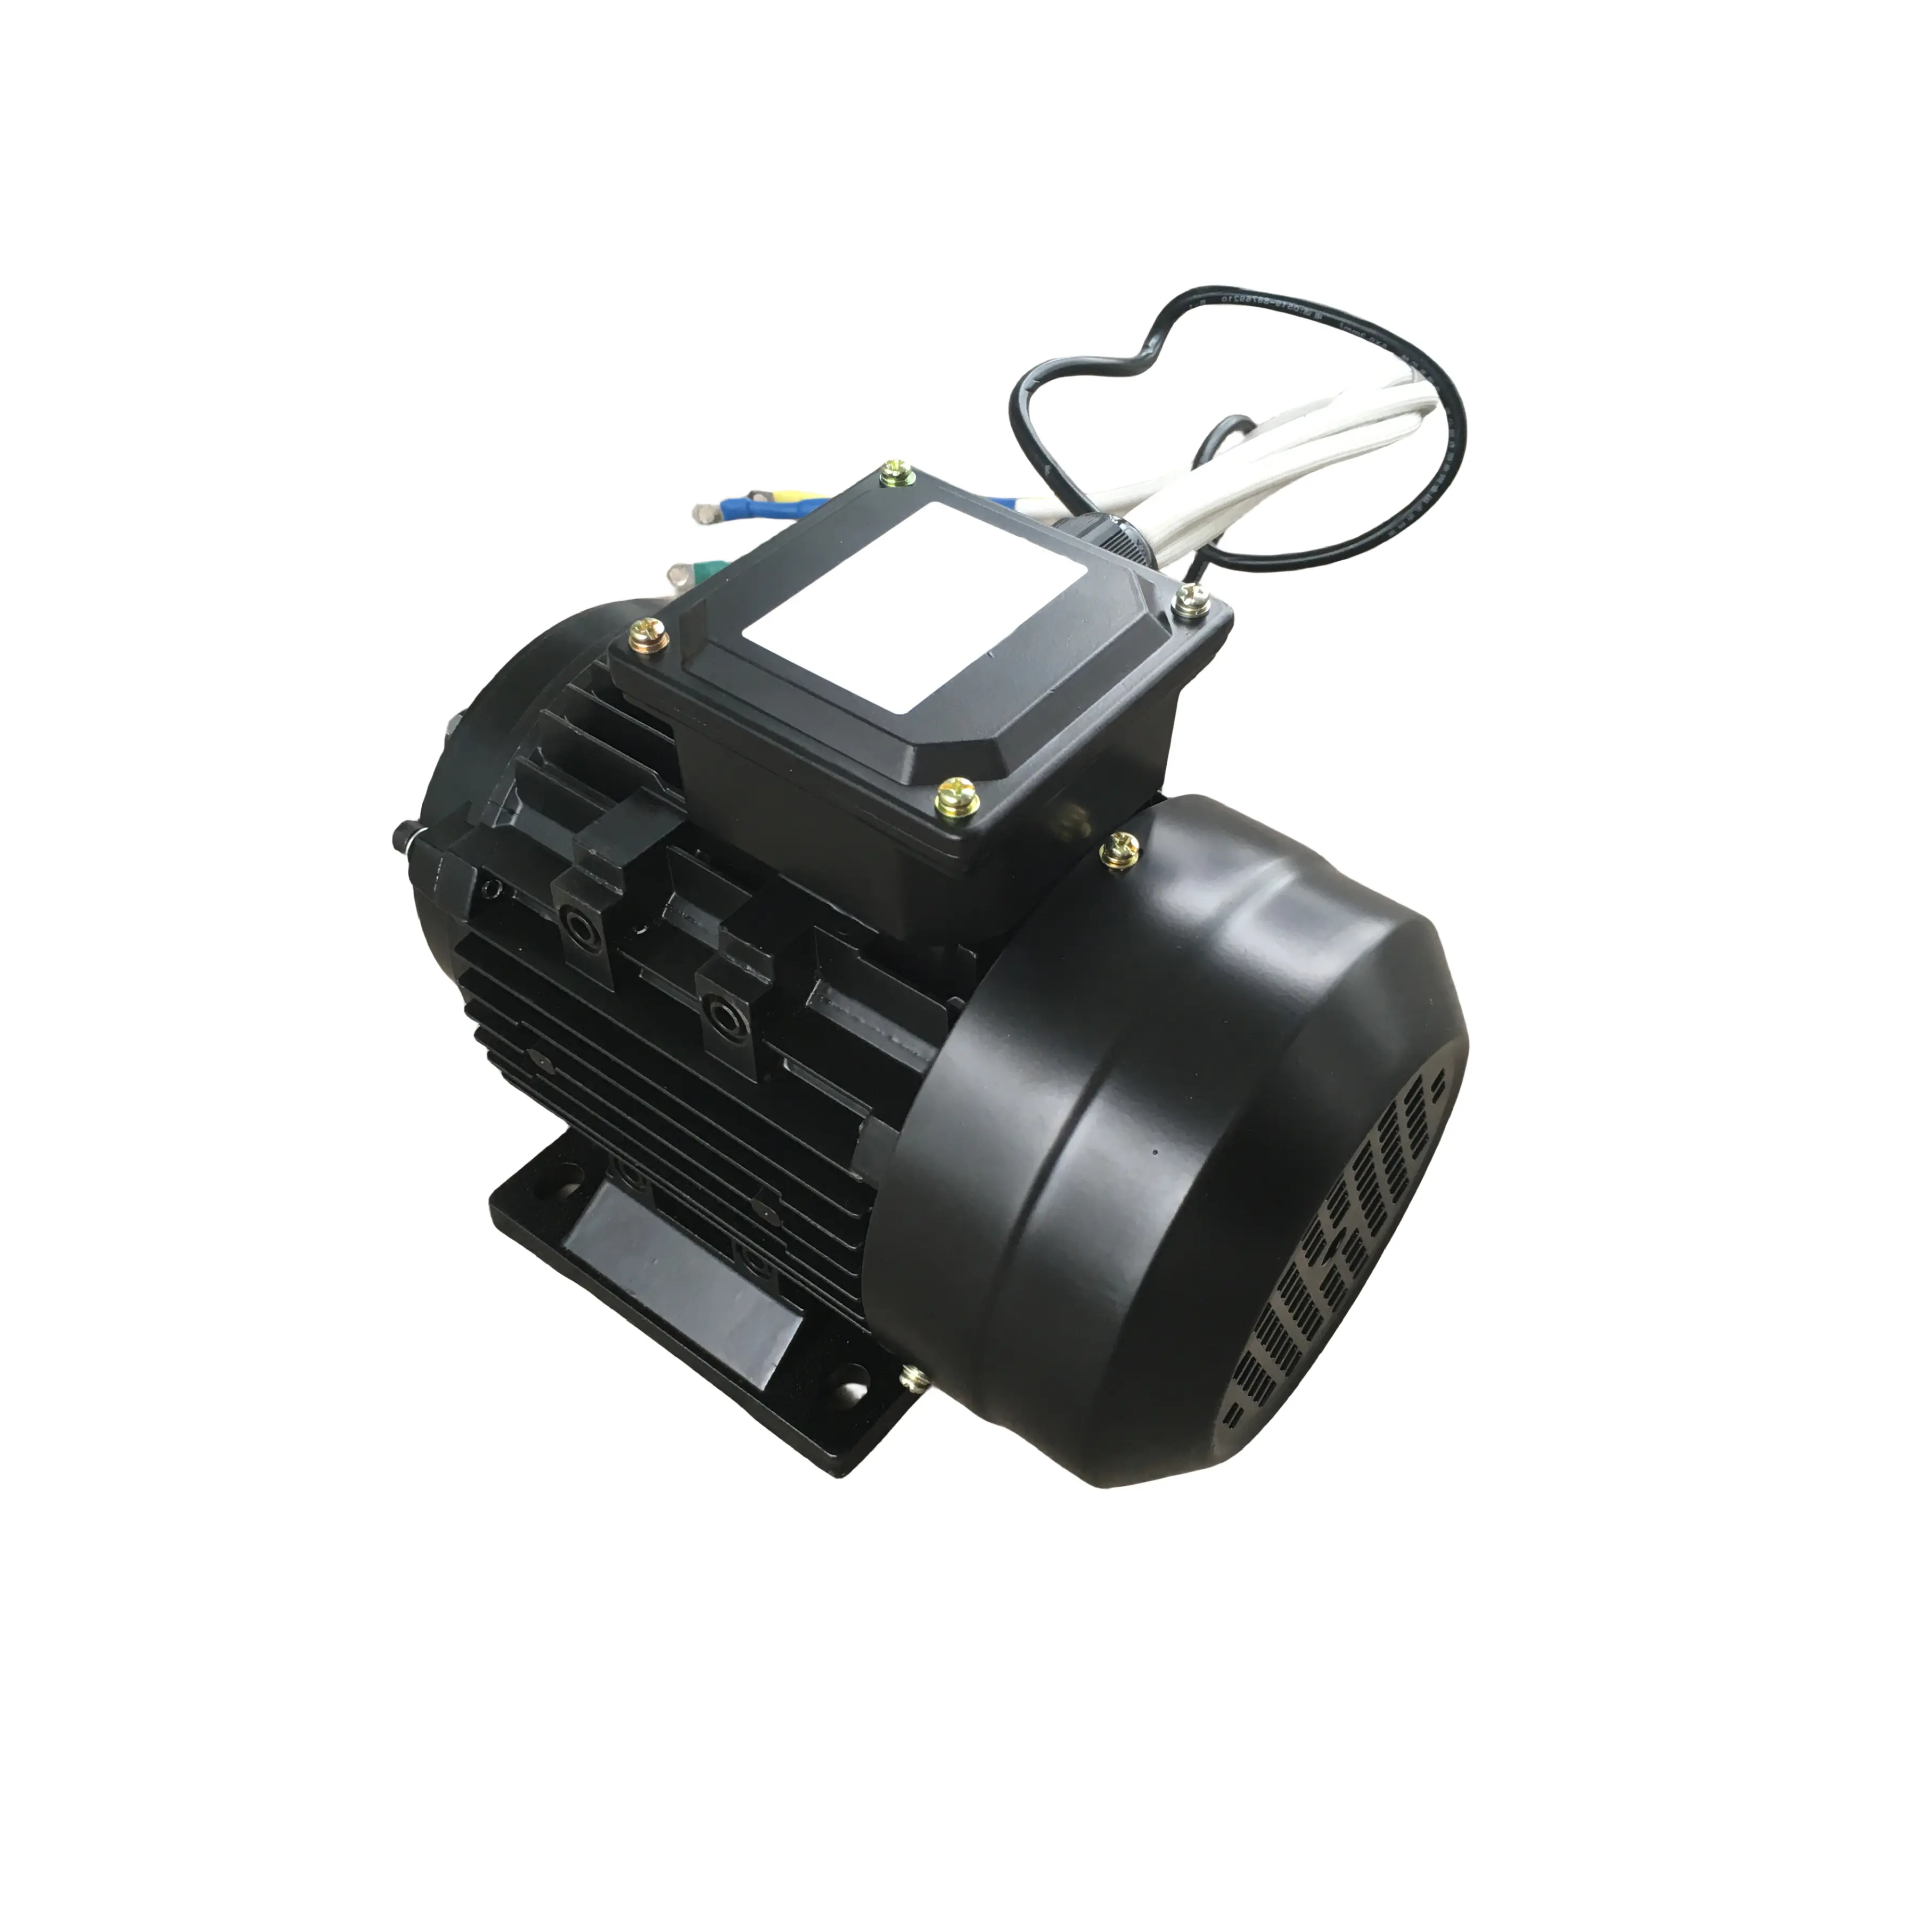 BLDC Motor 72V 6.3KW 1500RPM Brushless DC Motor for Industrial DC Traction Drive Control